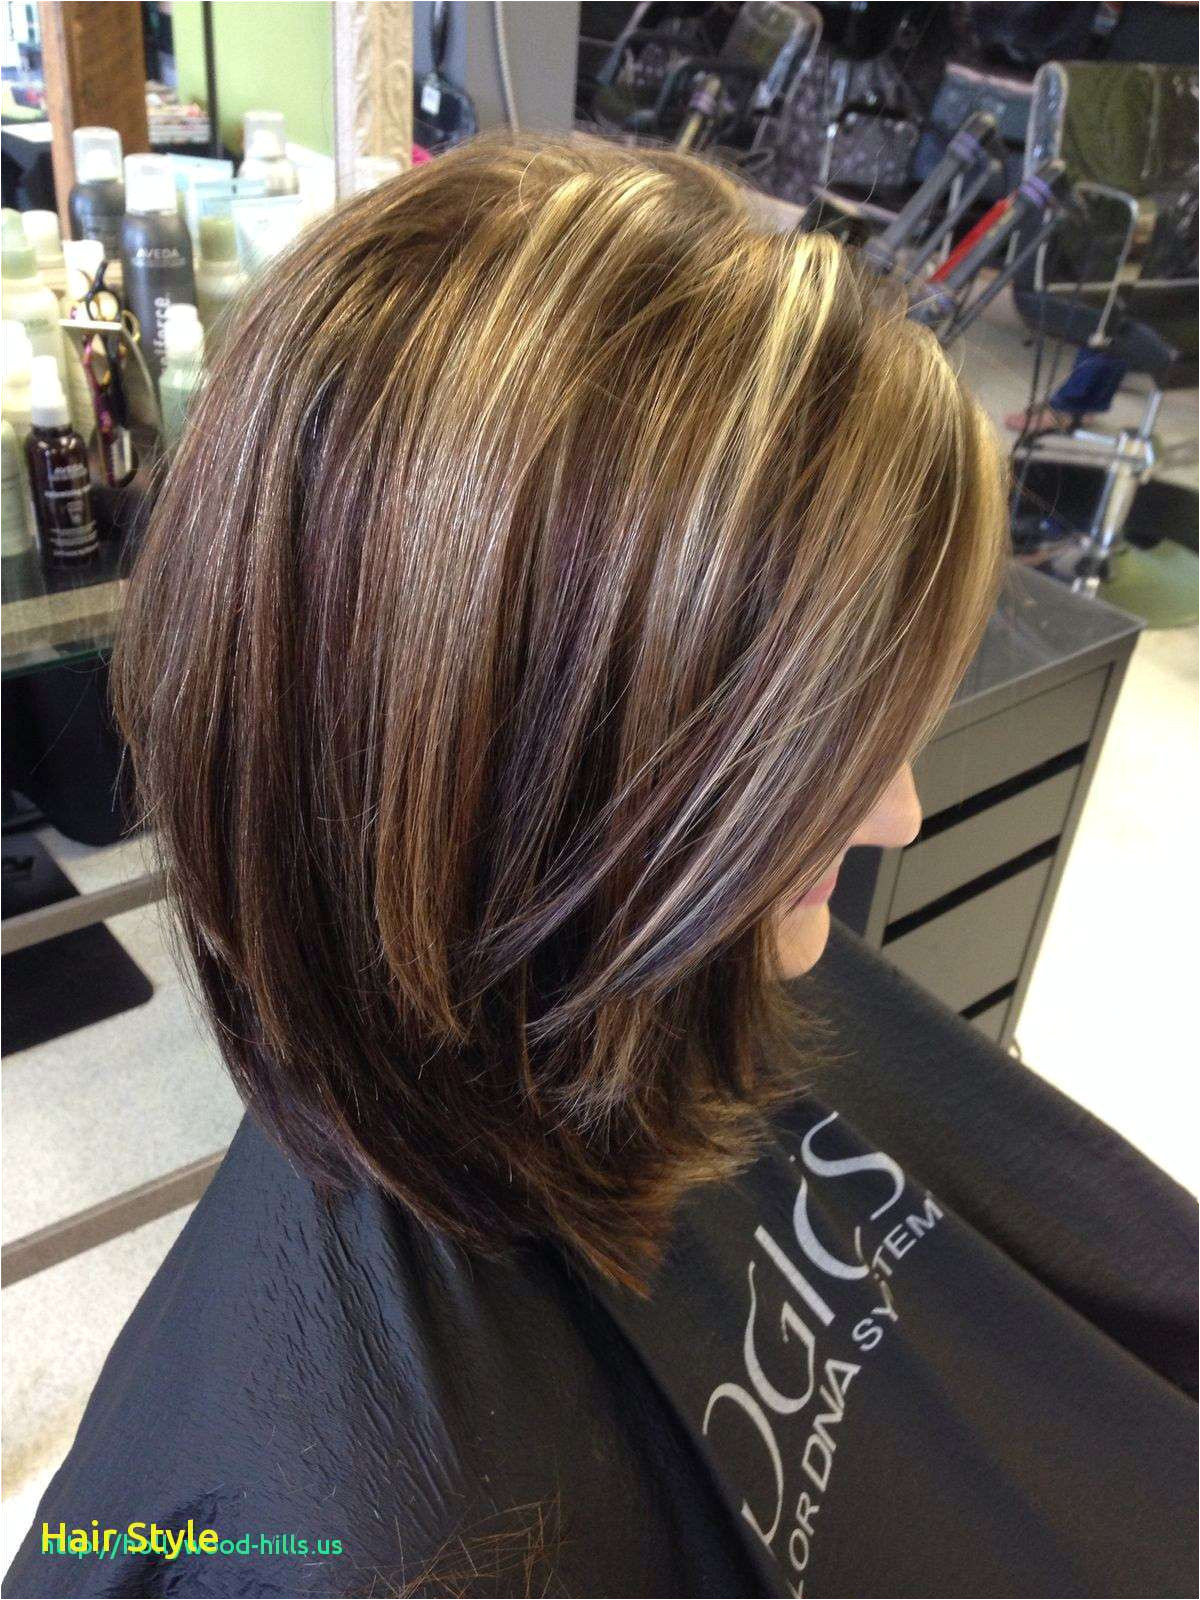 bobs hairstyle new bob hairstyles gorgeous i pinimg 1200x 0d 60 8a